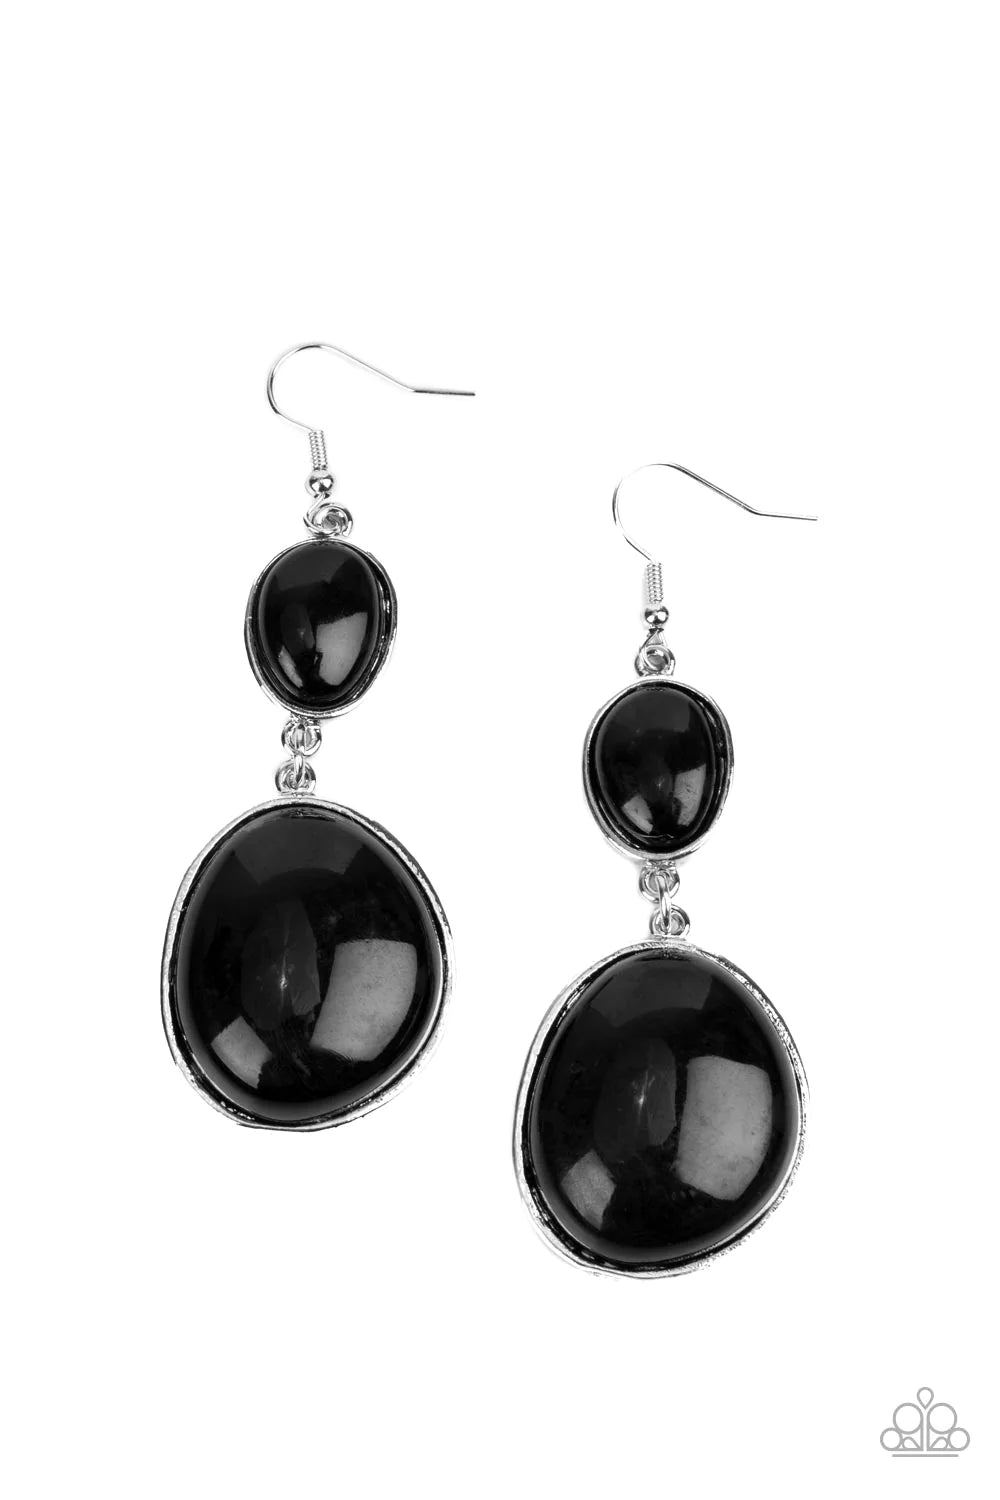 Paparazzi Accessories Soulful Samba - Black Featuring sleek silver fittings, an asymmetrical pair of mismatched oval black beads link into an eye-catching pop of color. Earring attaches to a standard fishhook fitting. Sold as one pair of earrings. Jewelry